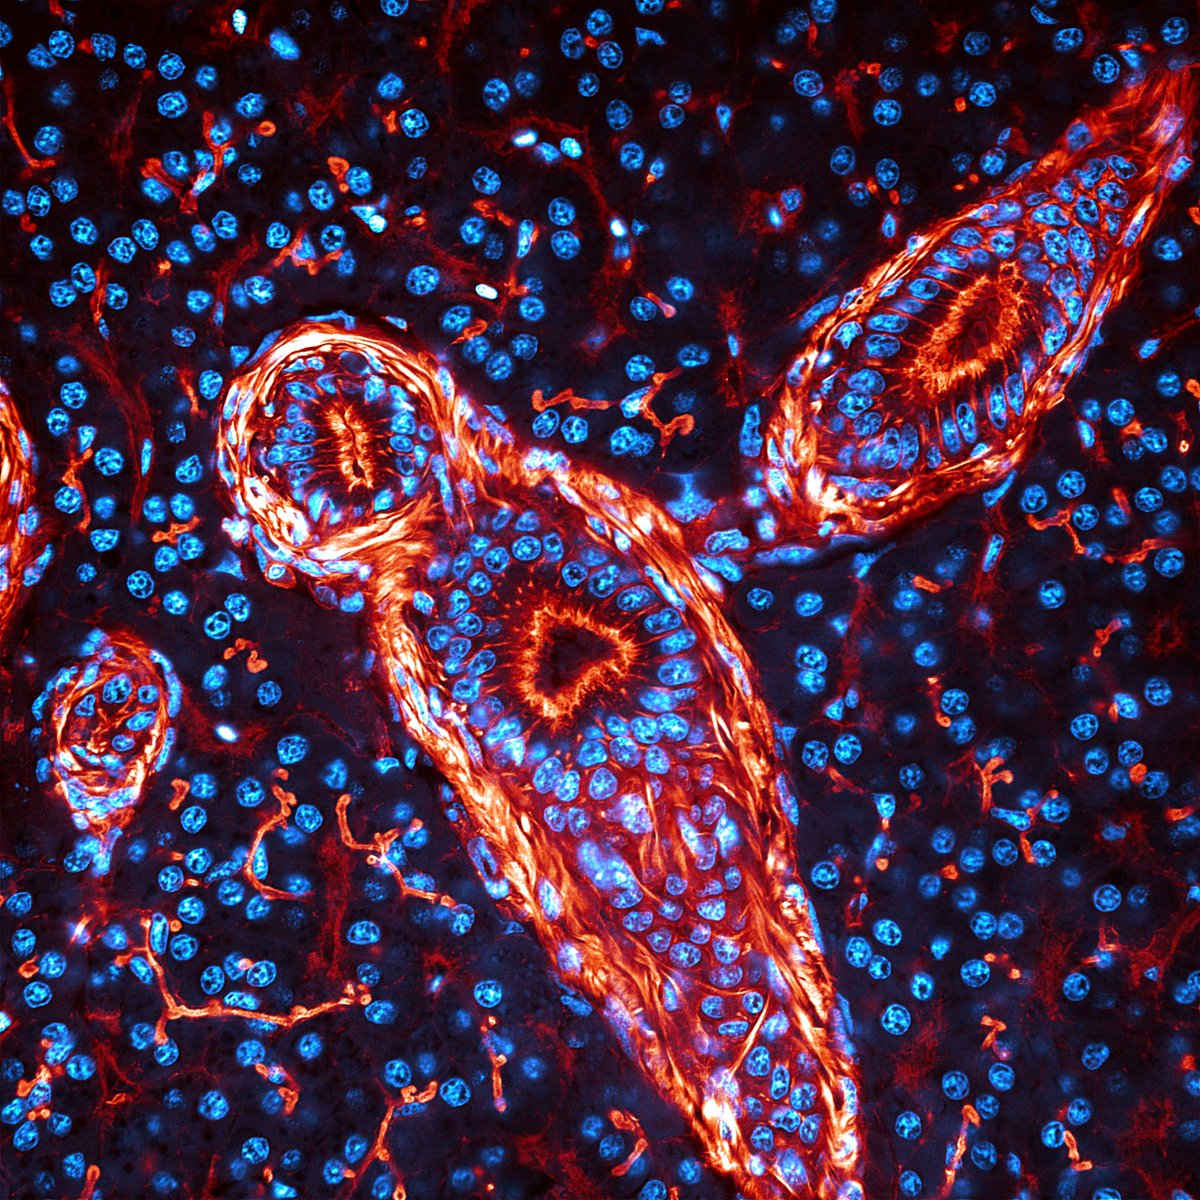 Adult zebrafish liver - The bright structures are bile ducts that are surrounded by smooth muscles.

#Science #Microscopy #Sciart #liver #Zebrafish